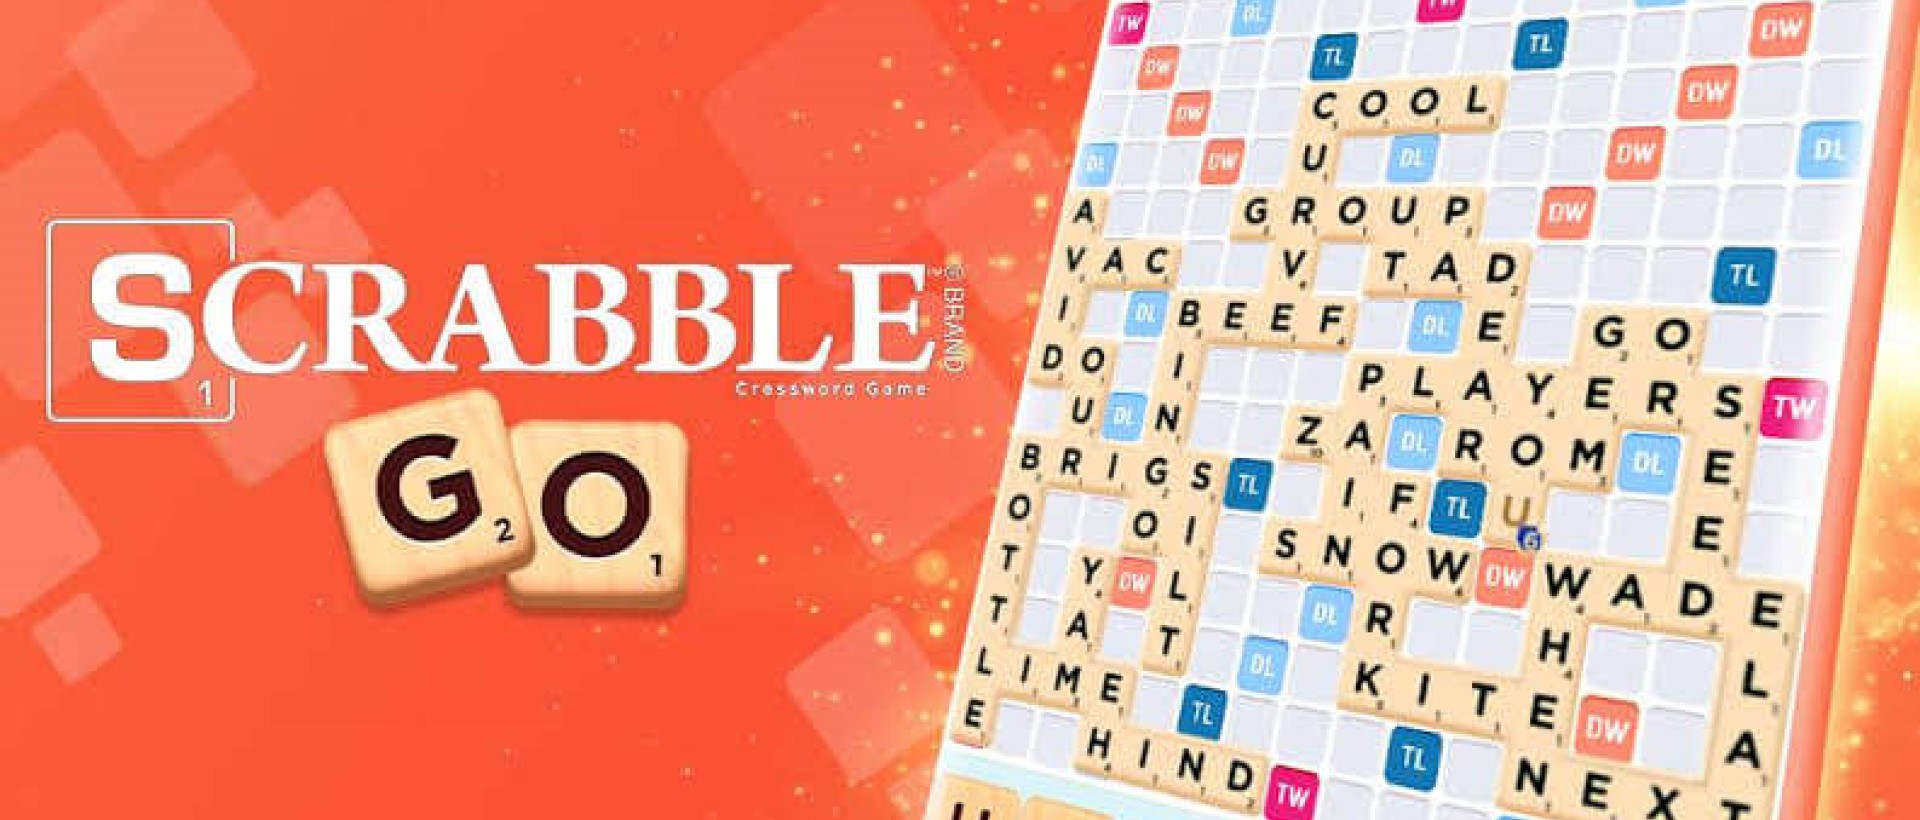 scrabble online free game against computer